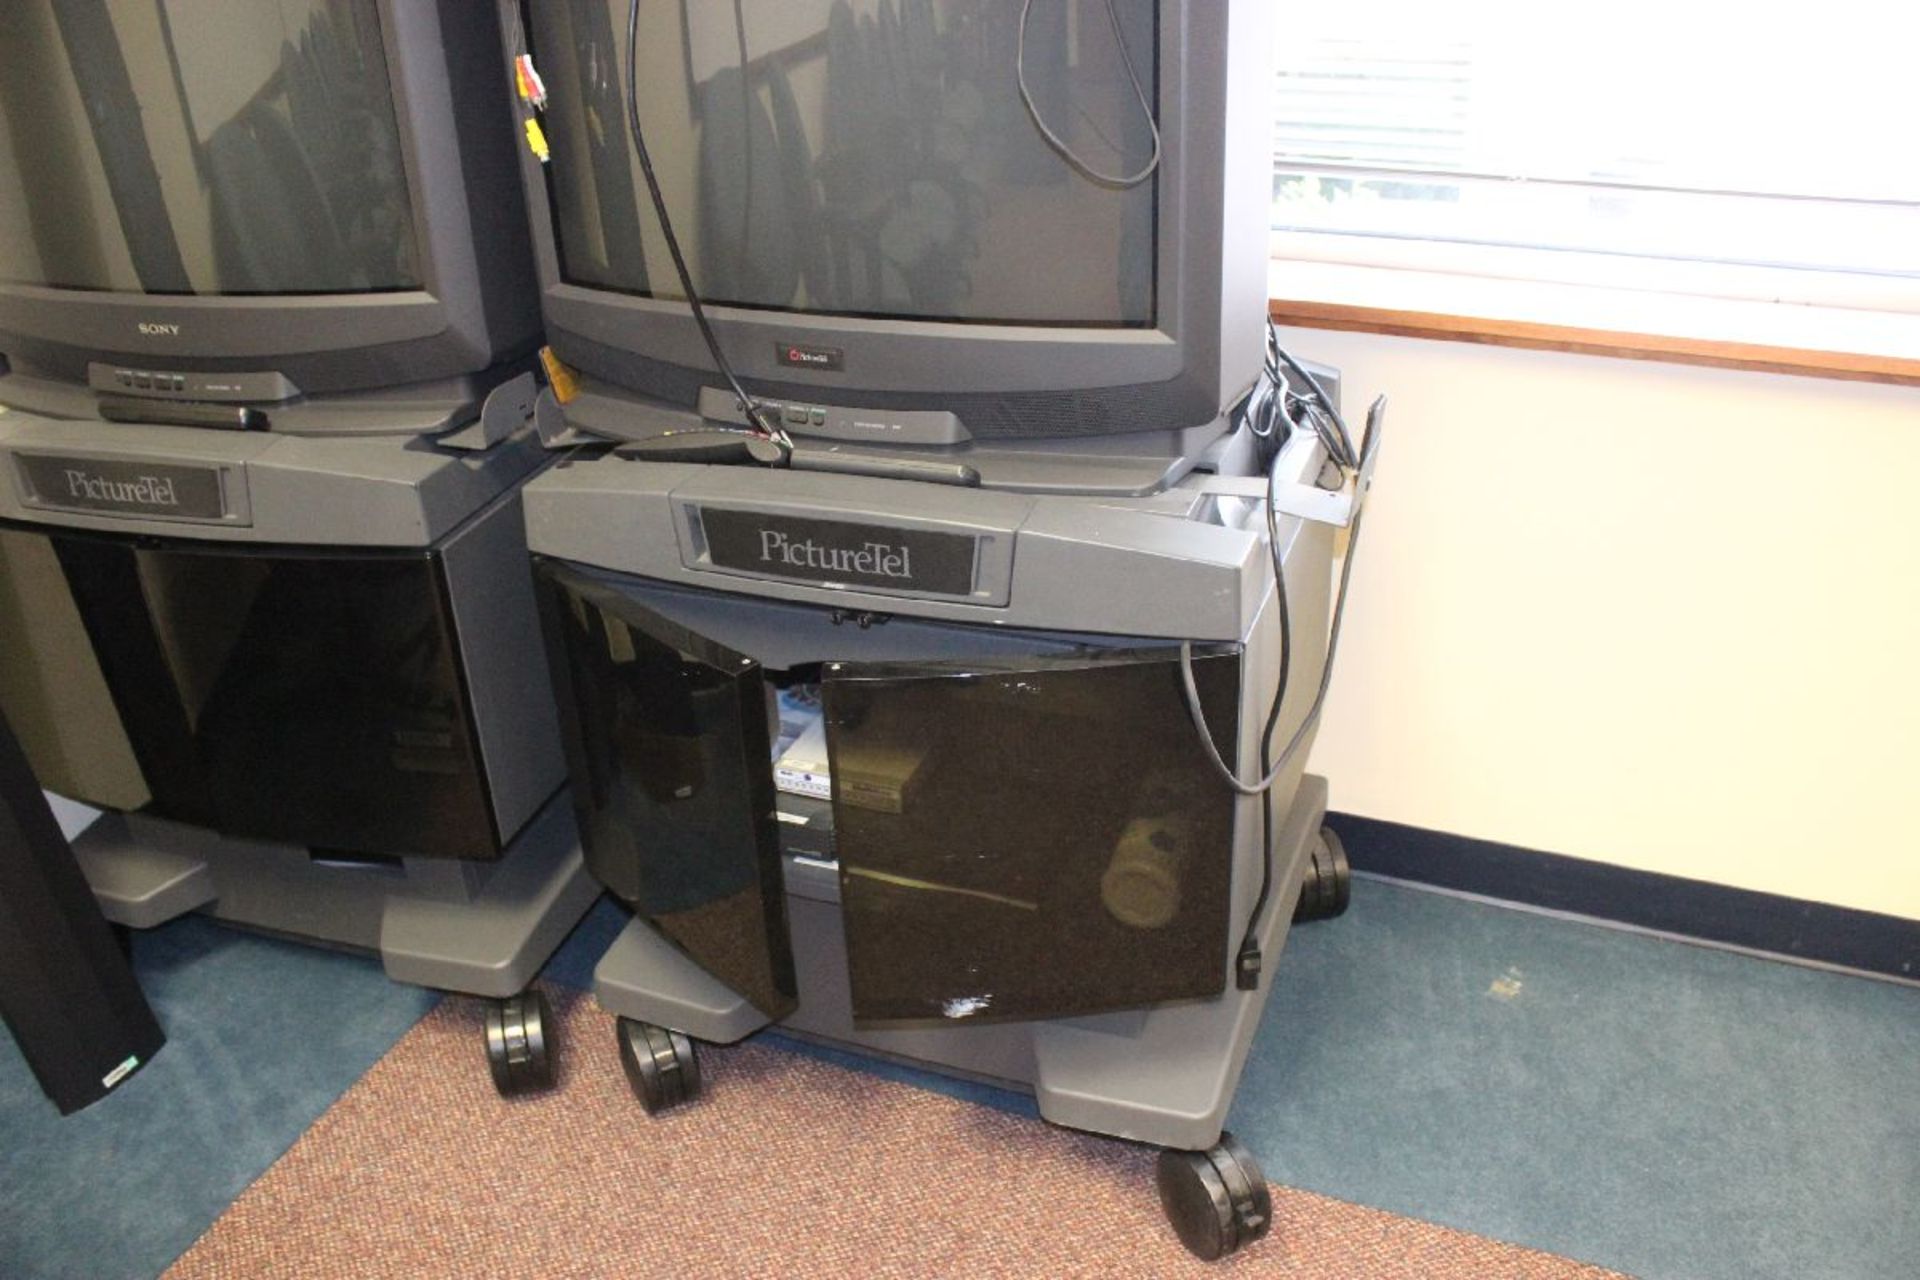 PICTURE-TEL VIDEO CONFERENCE SYSTEM WITH 33" TELEVISION AND PICTURETEL VIDEO CAMERA - Image 2 of 3